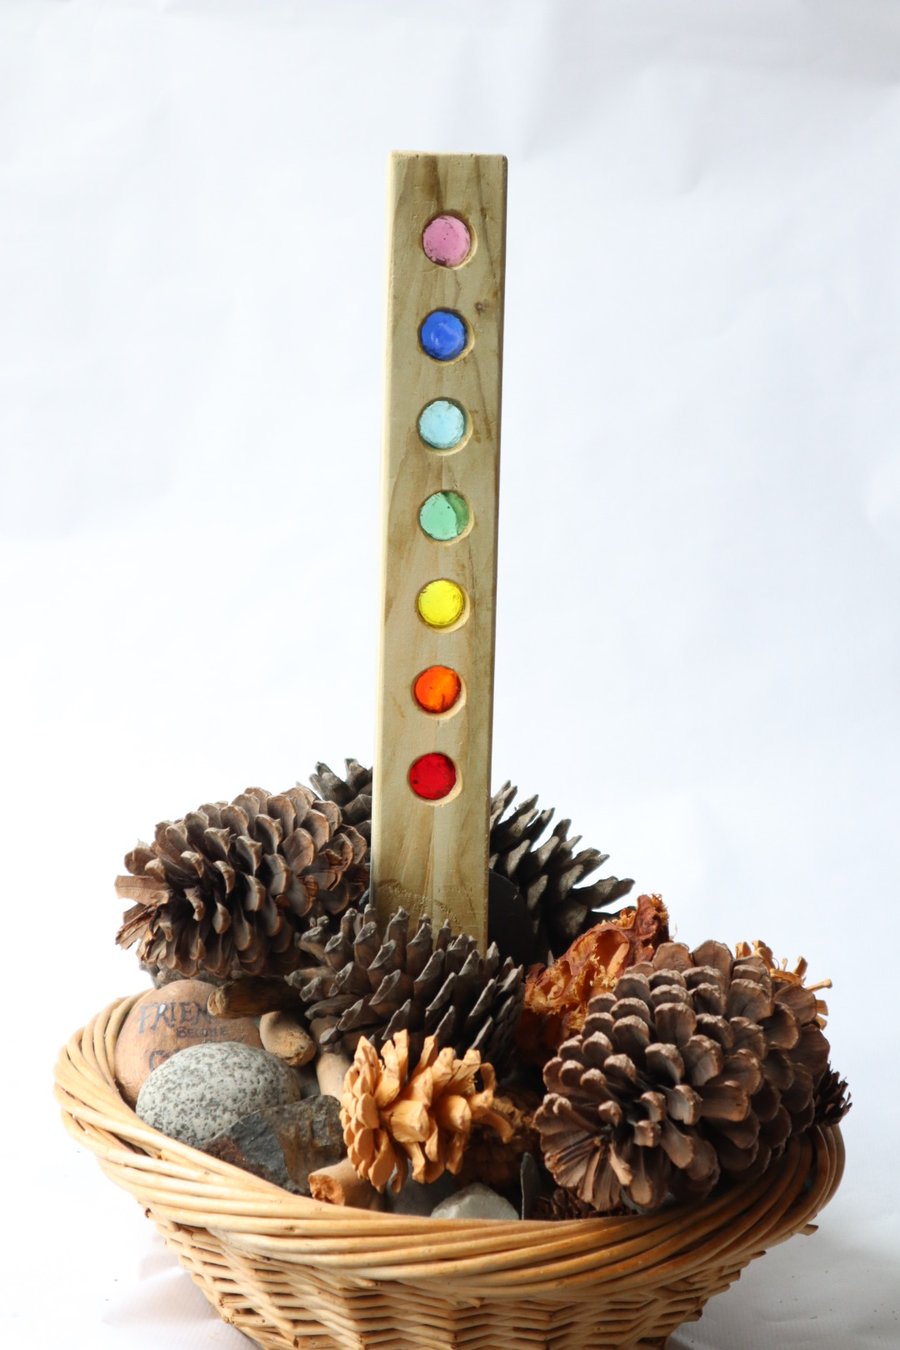 Decorative garden stake, wood and glass